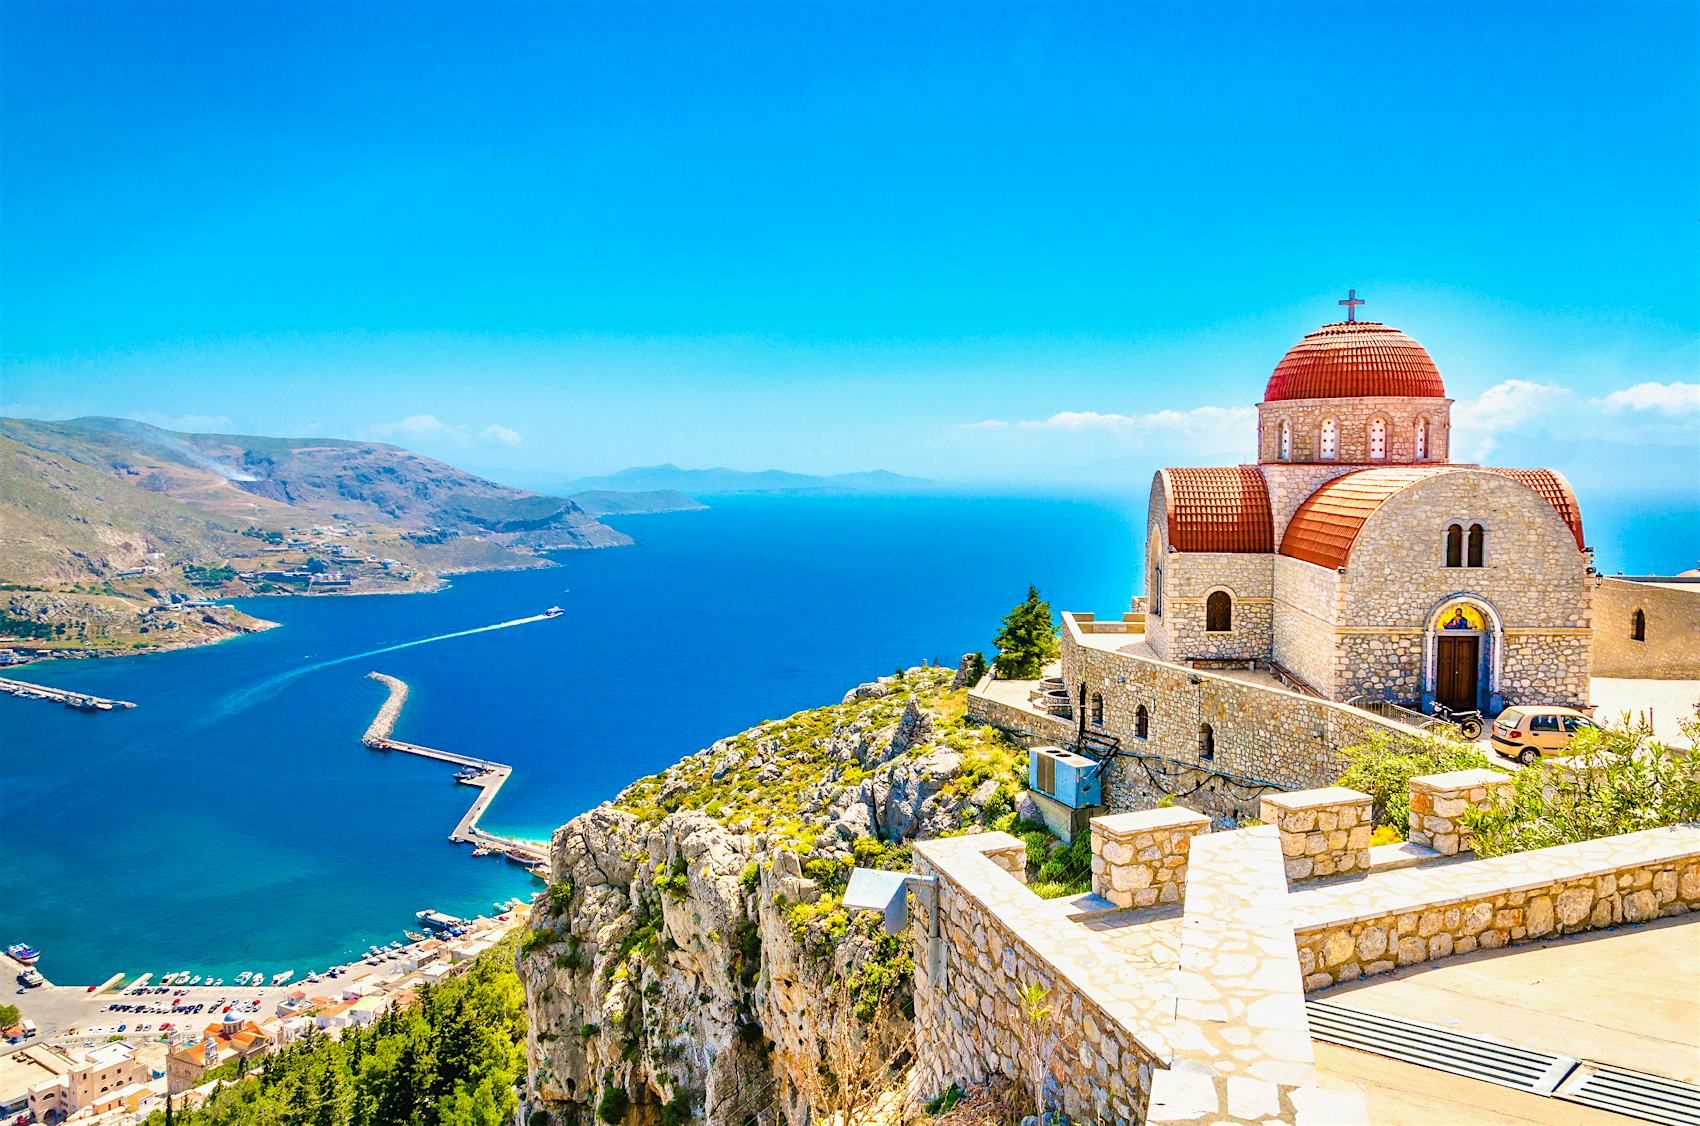 Monastery of Agios Savvas located on top of a hill in Kalymnos, Dodecanese, Greece